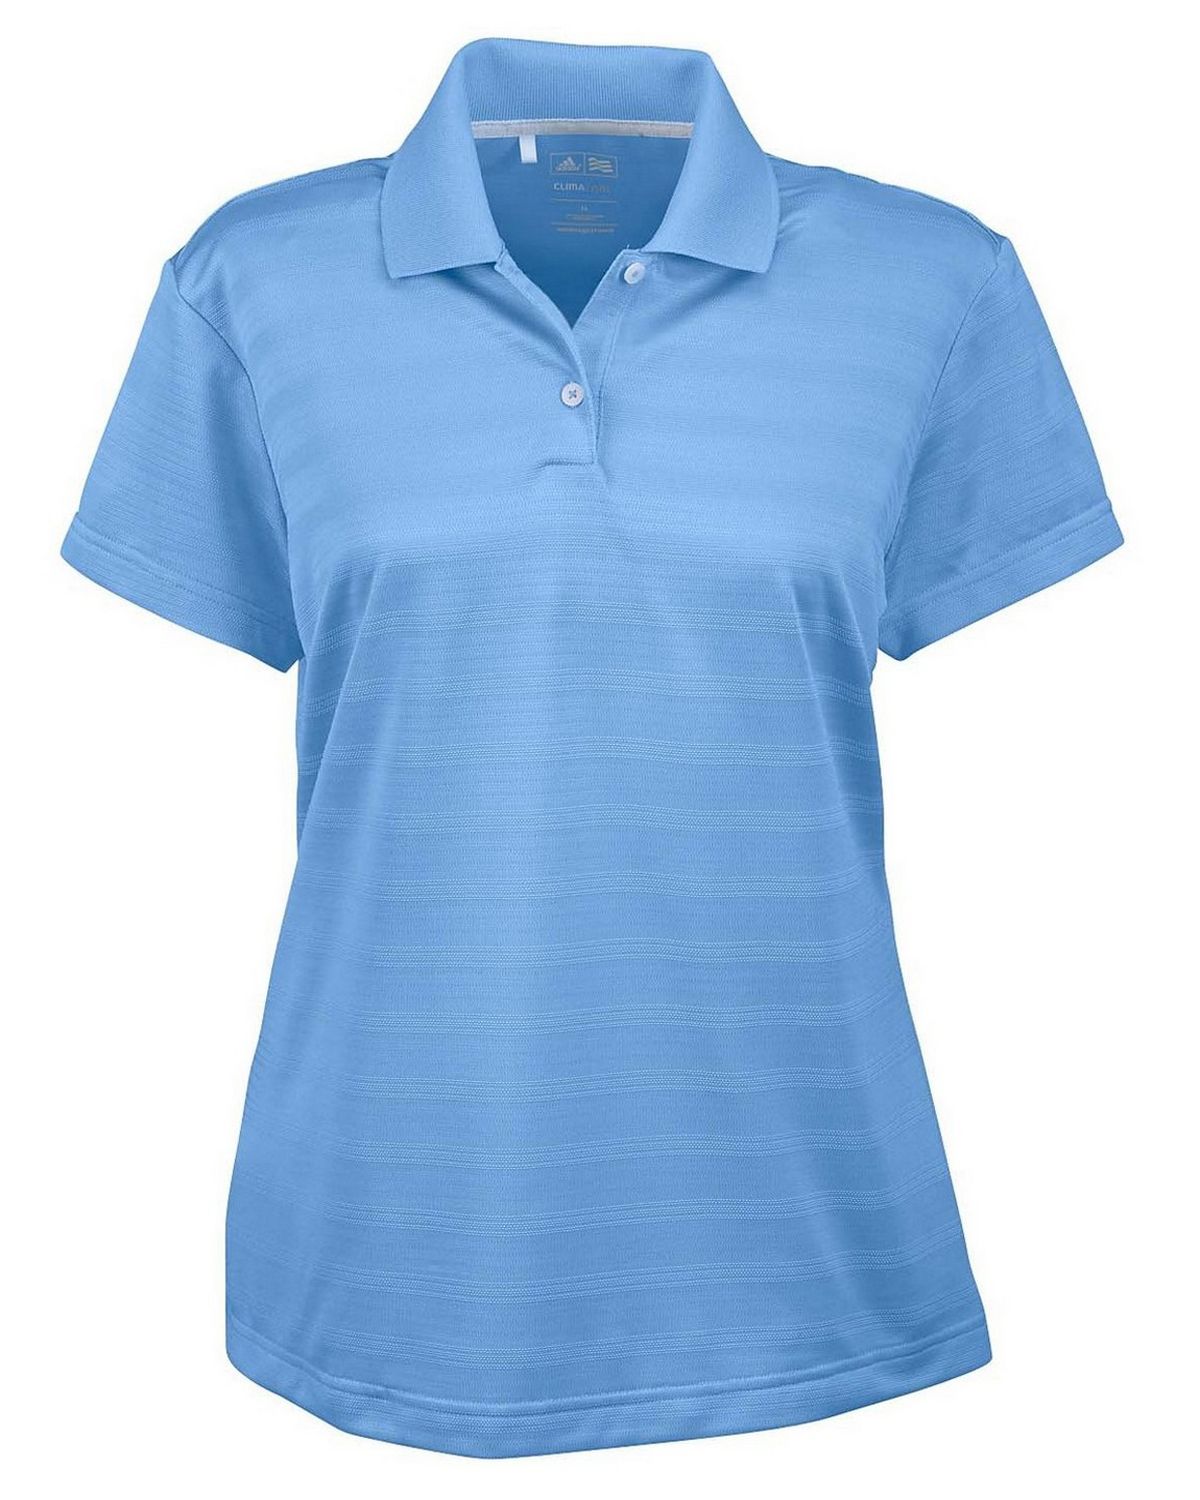 Buy Adidas Golf A162 Ladies’ ClimaLite Textured Short-Sleeve Polo ...